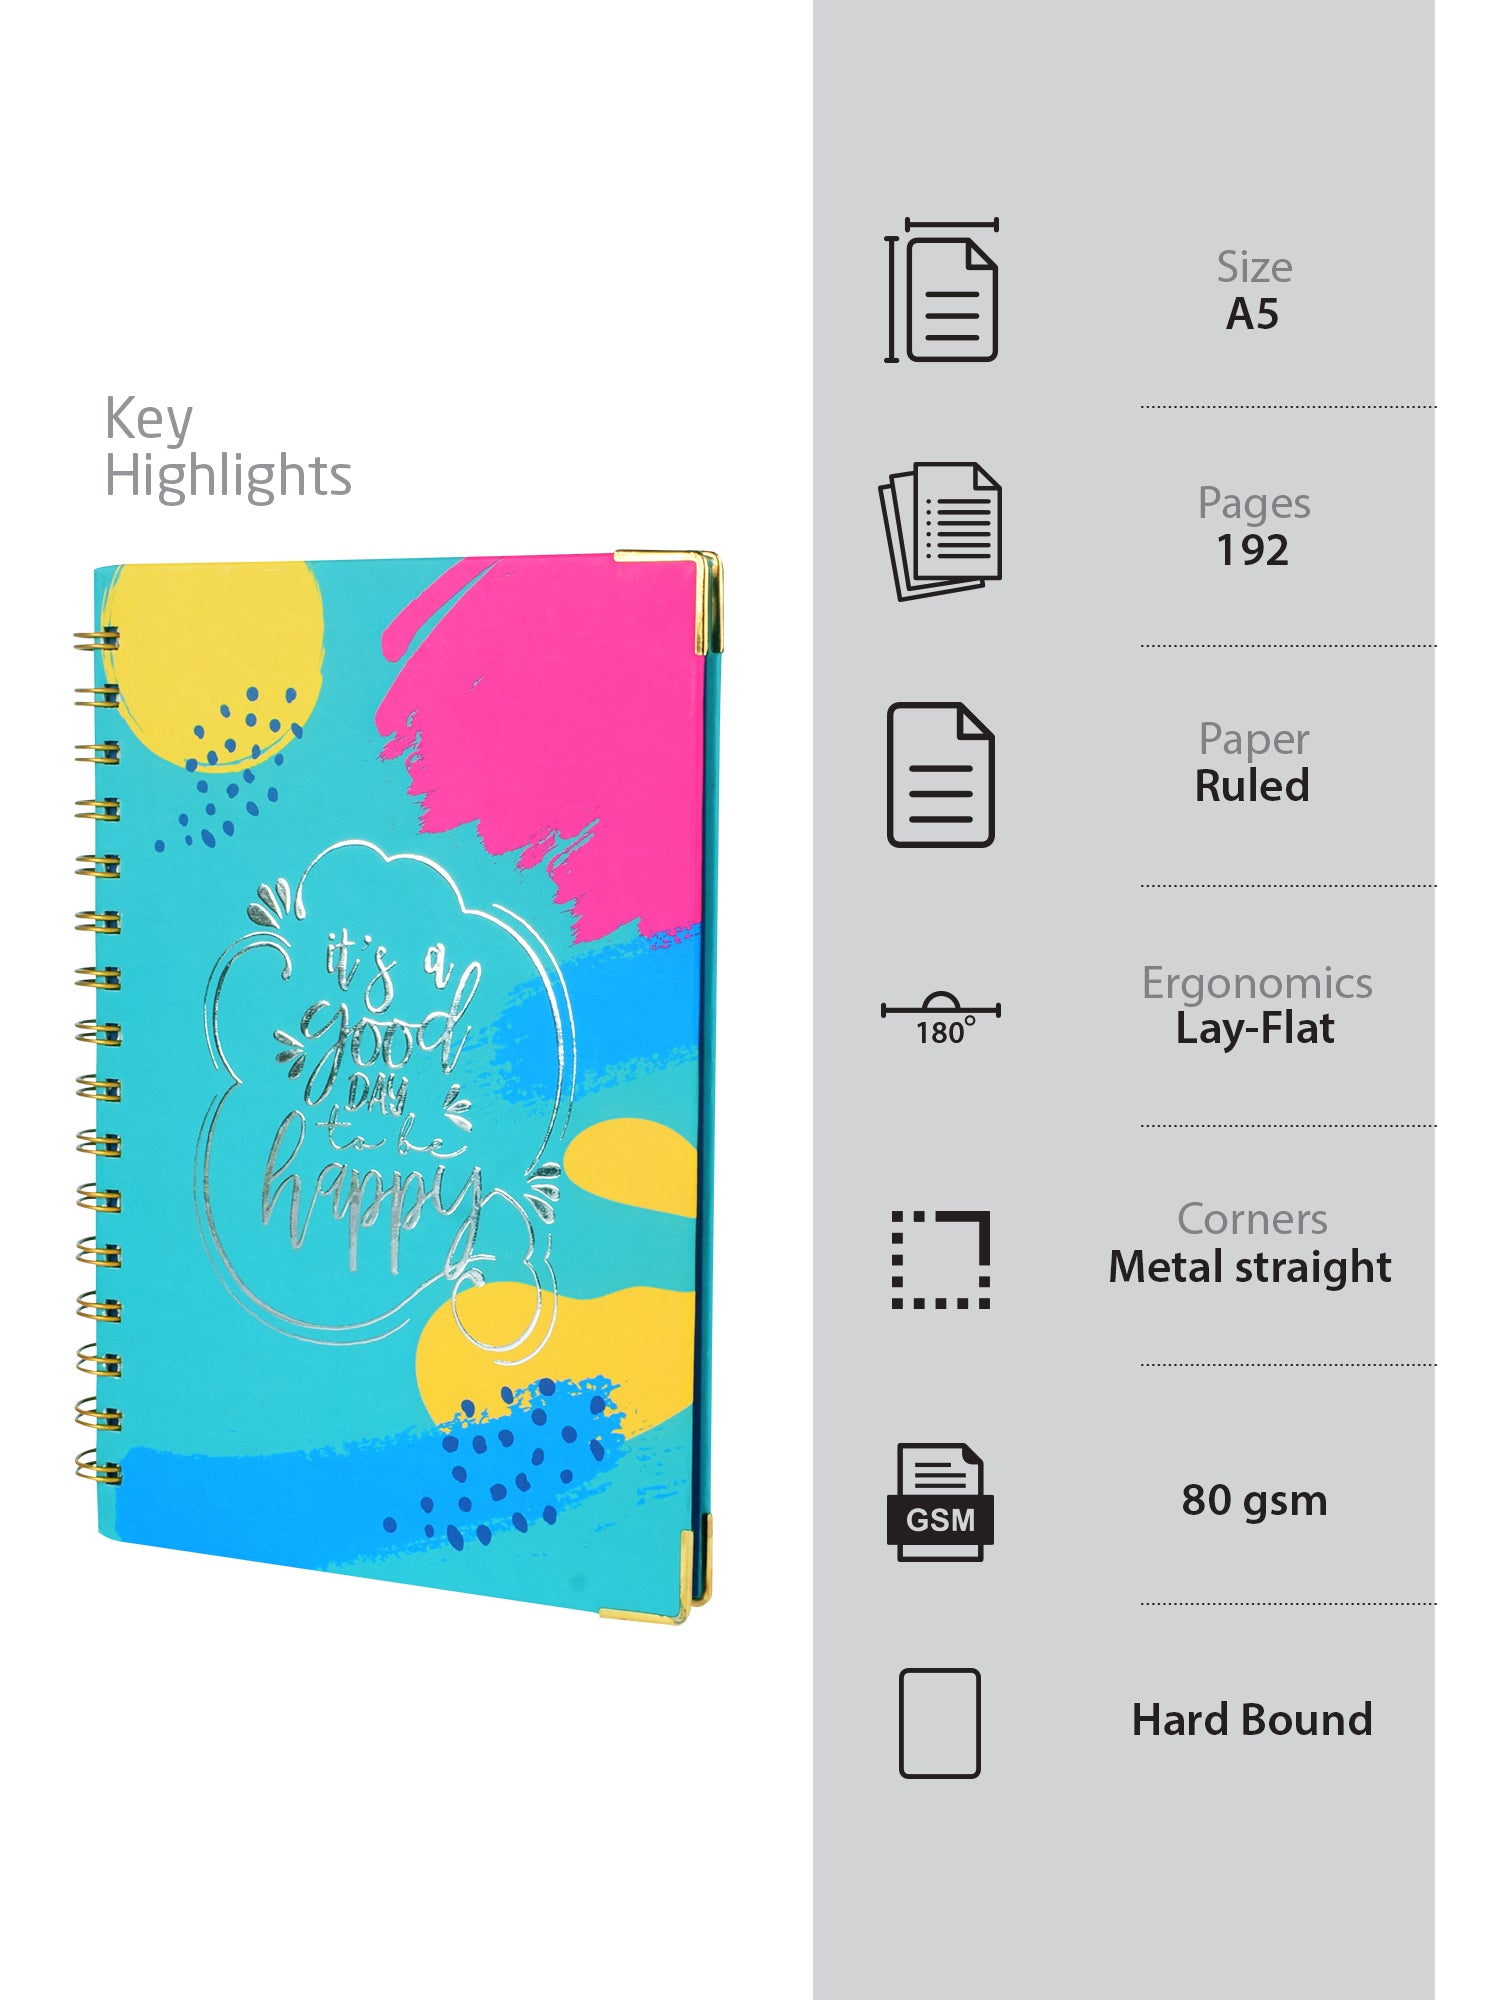 Happy Day - Blue - Daily Planner